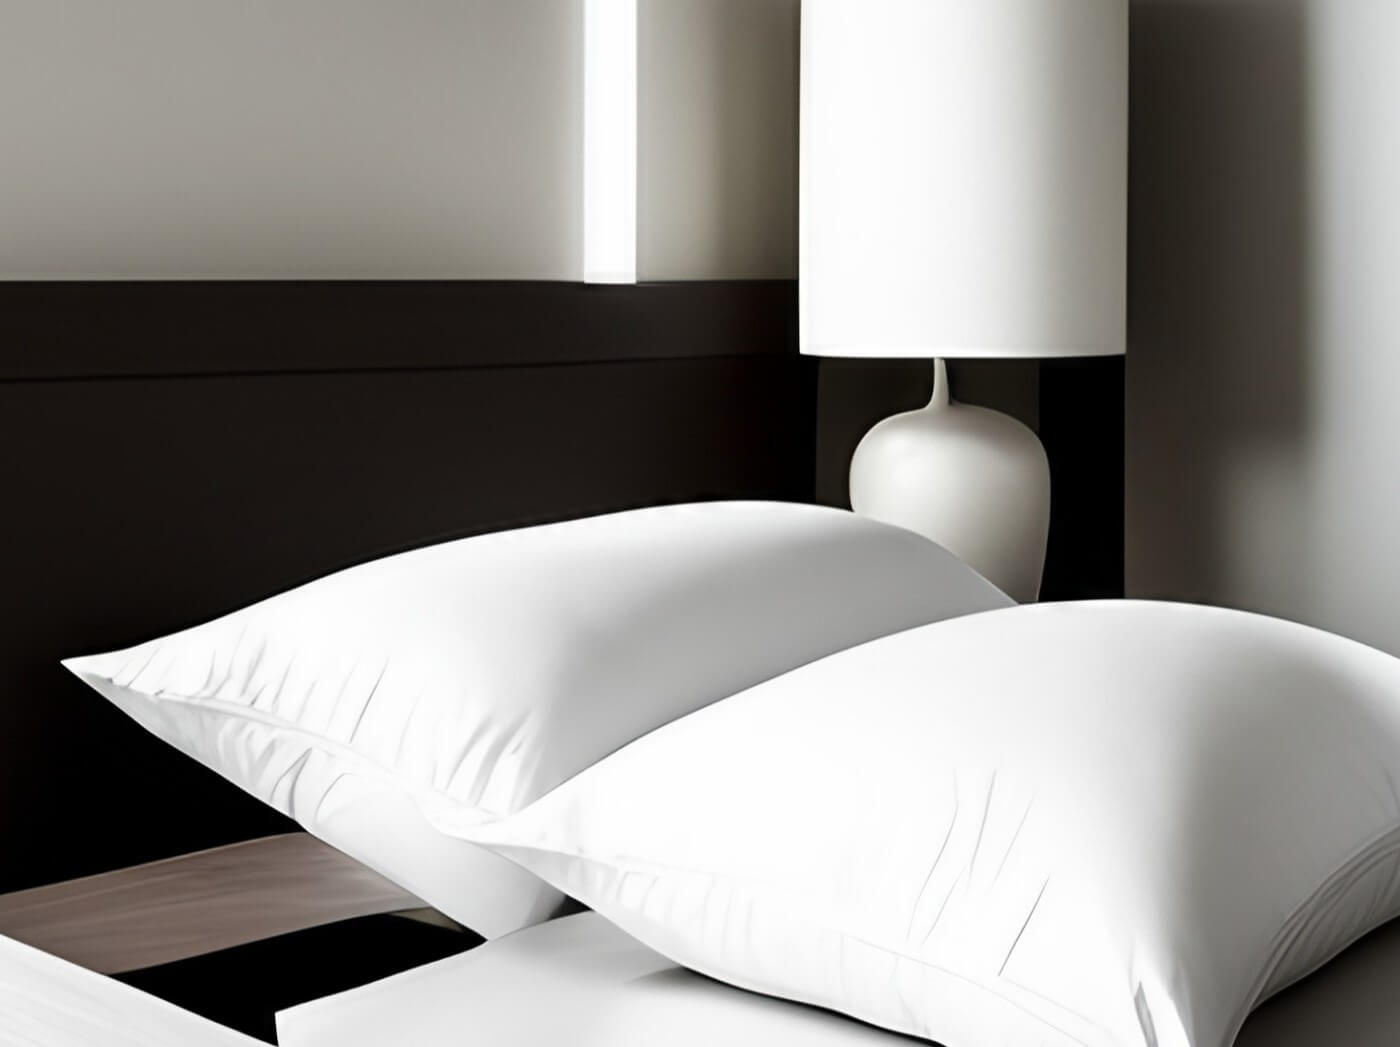 Pillow Showdown: 2 of our best selling wholesale hotel pillows